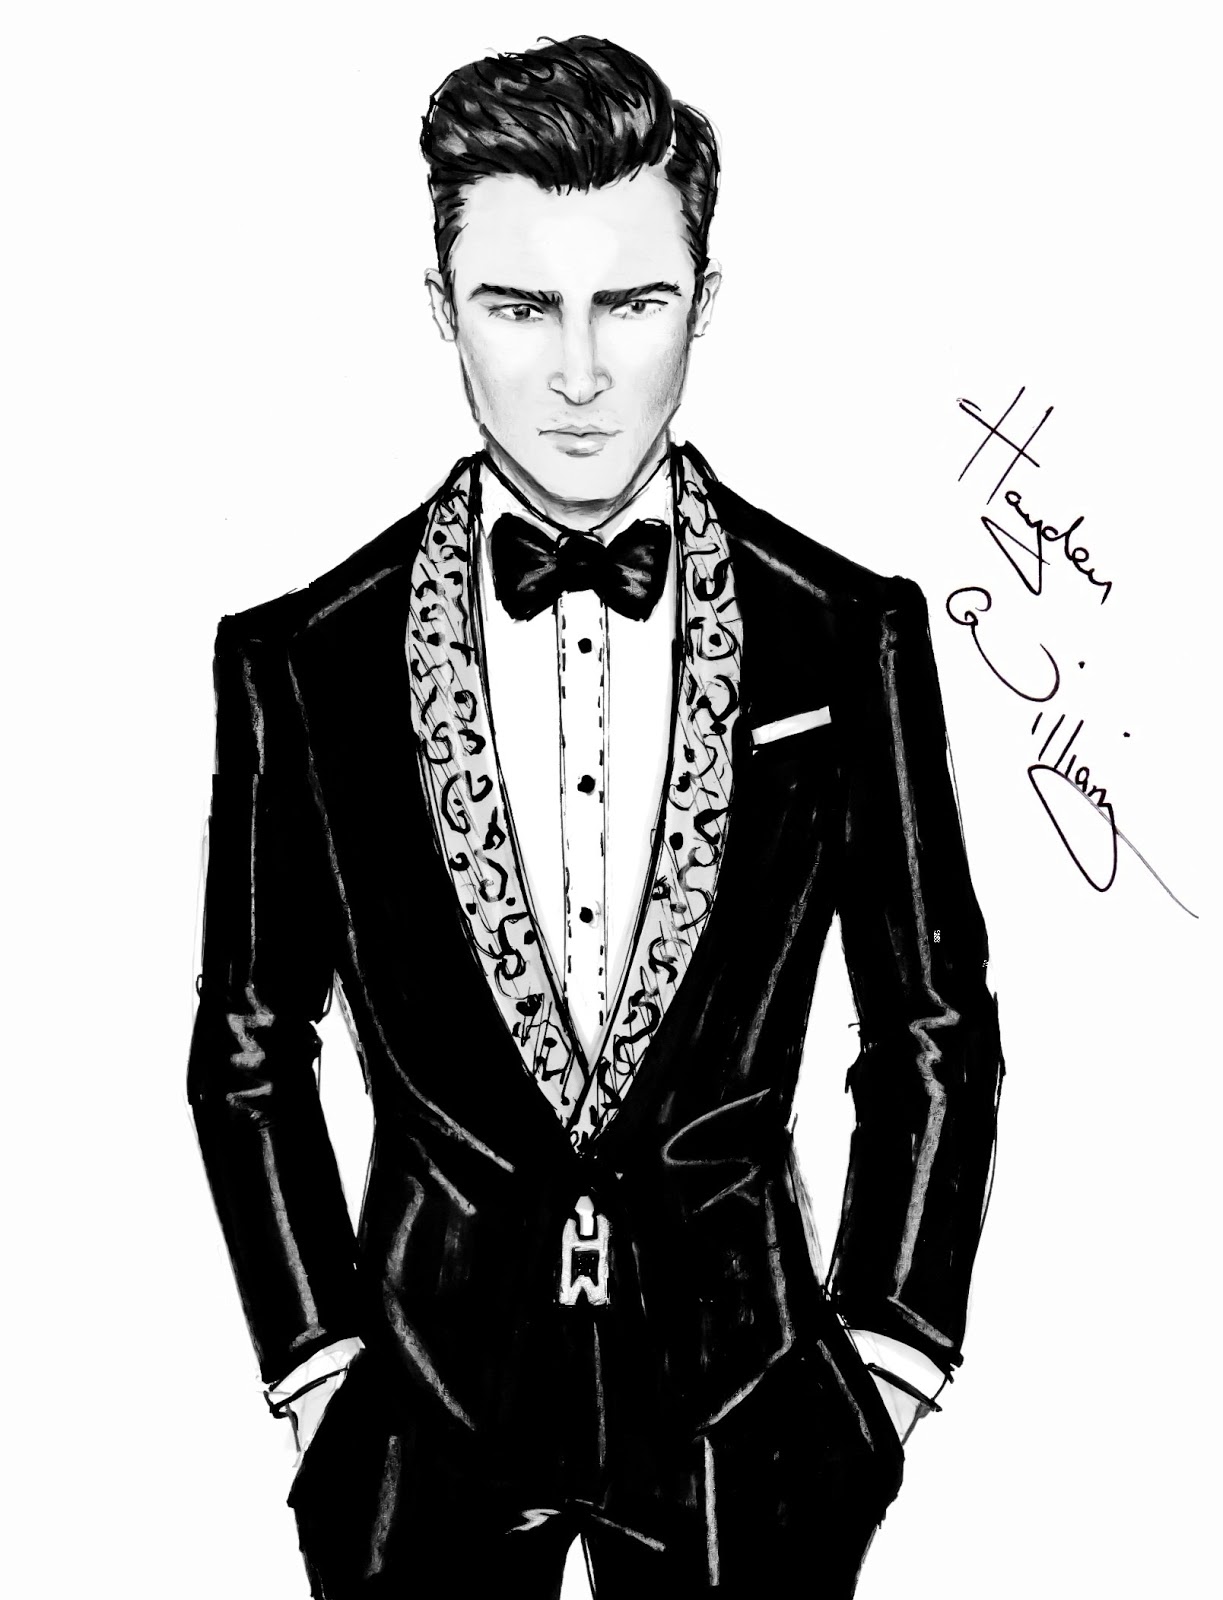 Man In Suit Drawing at GetDrawings.com | Free for personal use Man ...